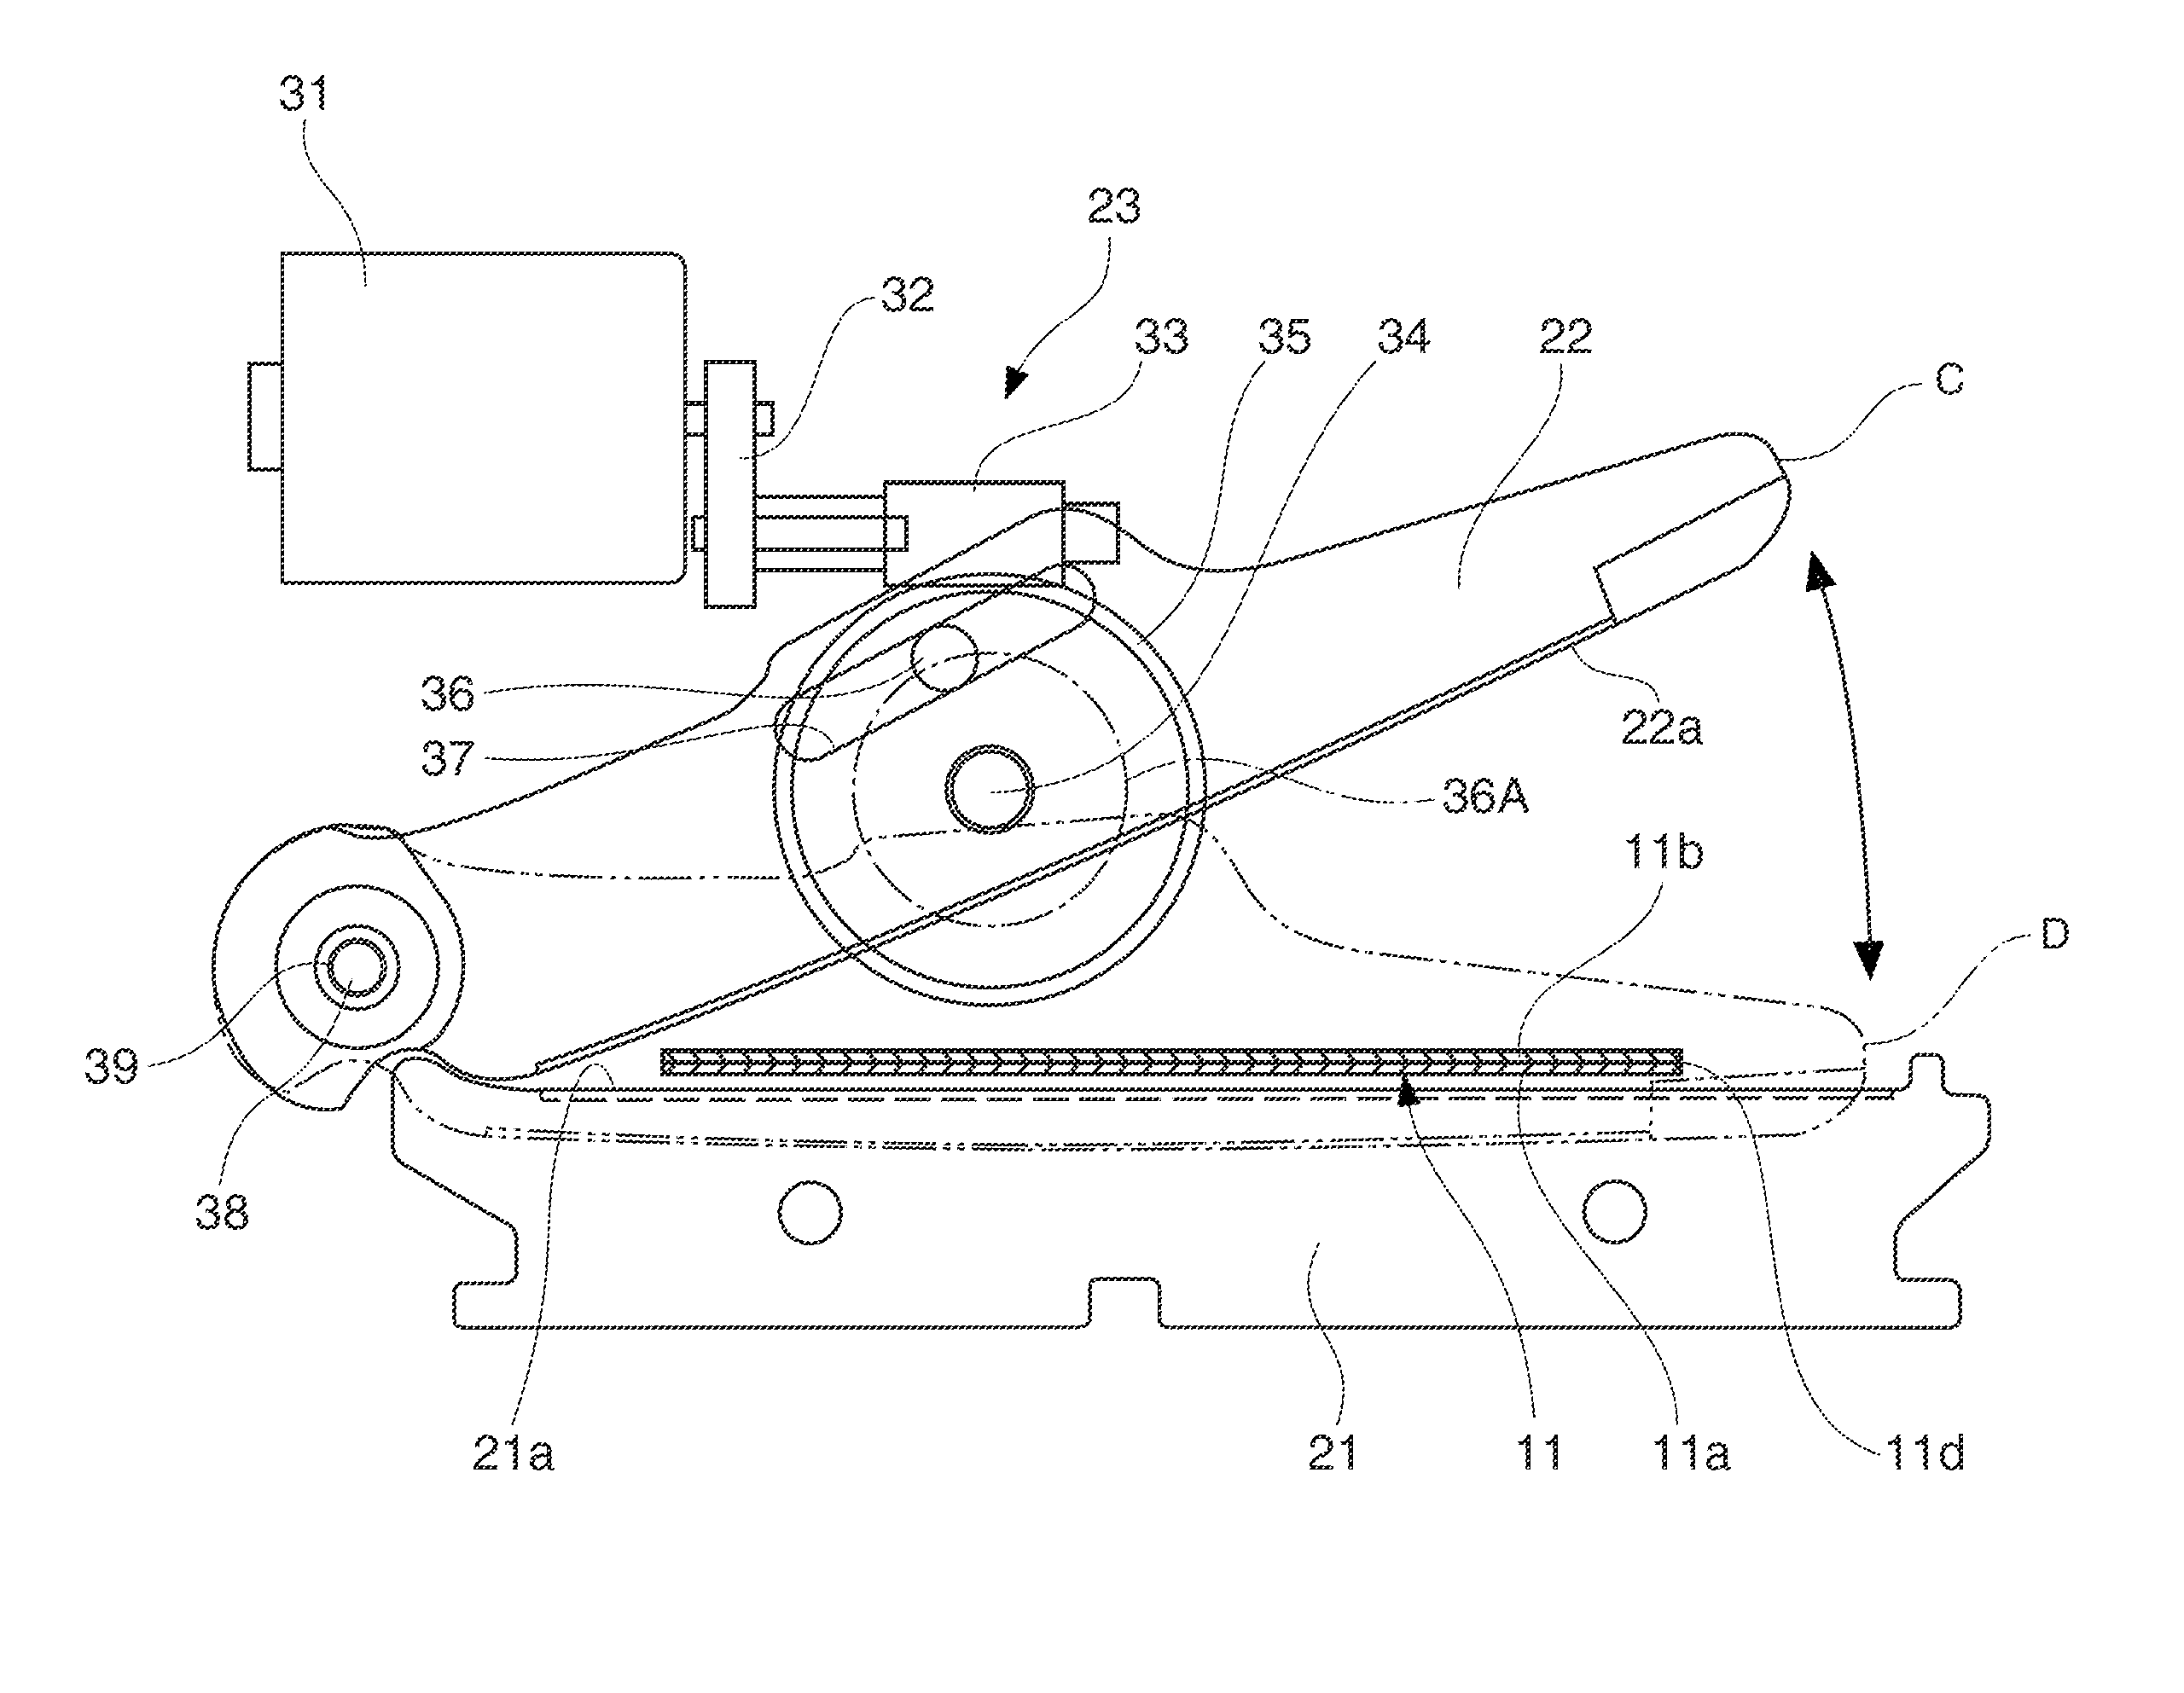 Cutter and printer with cutter